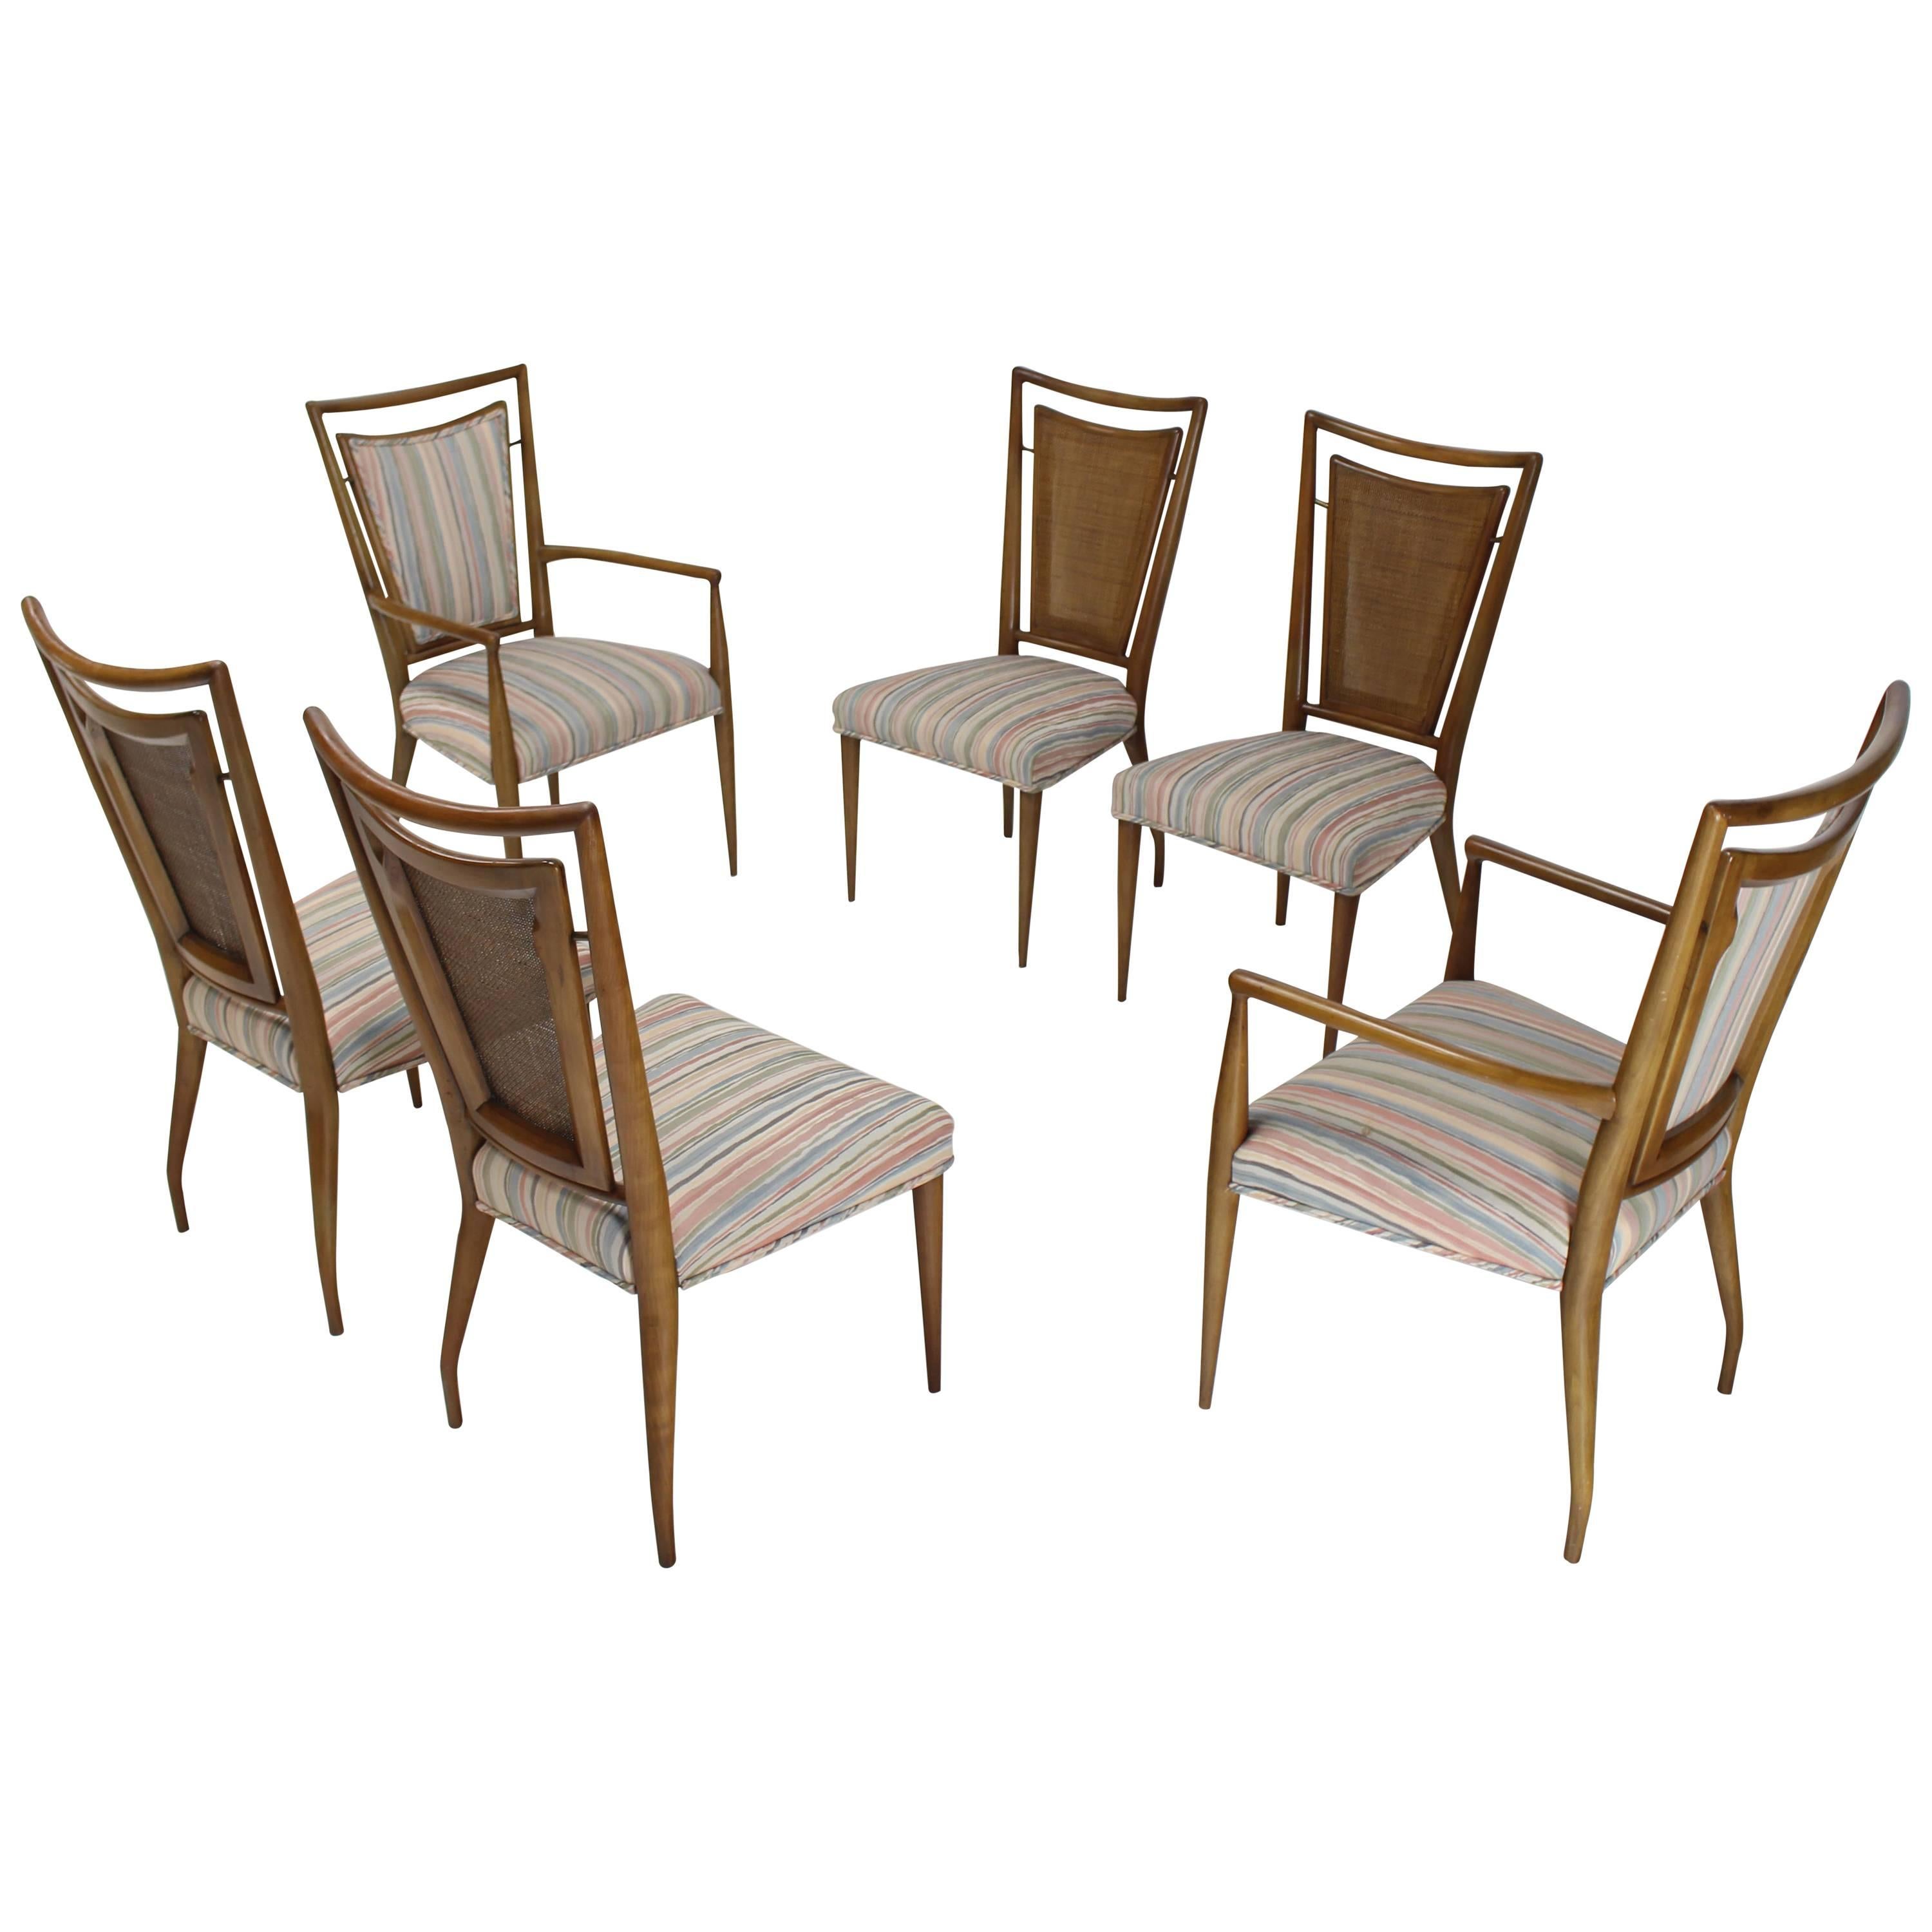 Set of Six Mid-Century Modern Walnut Dining Chairs by Widdicomb in Ponti Style For Sale